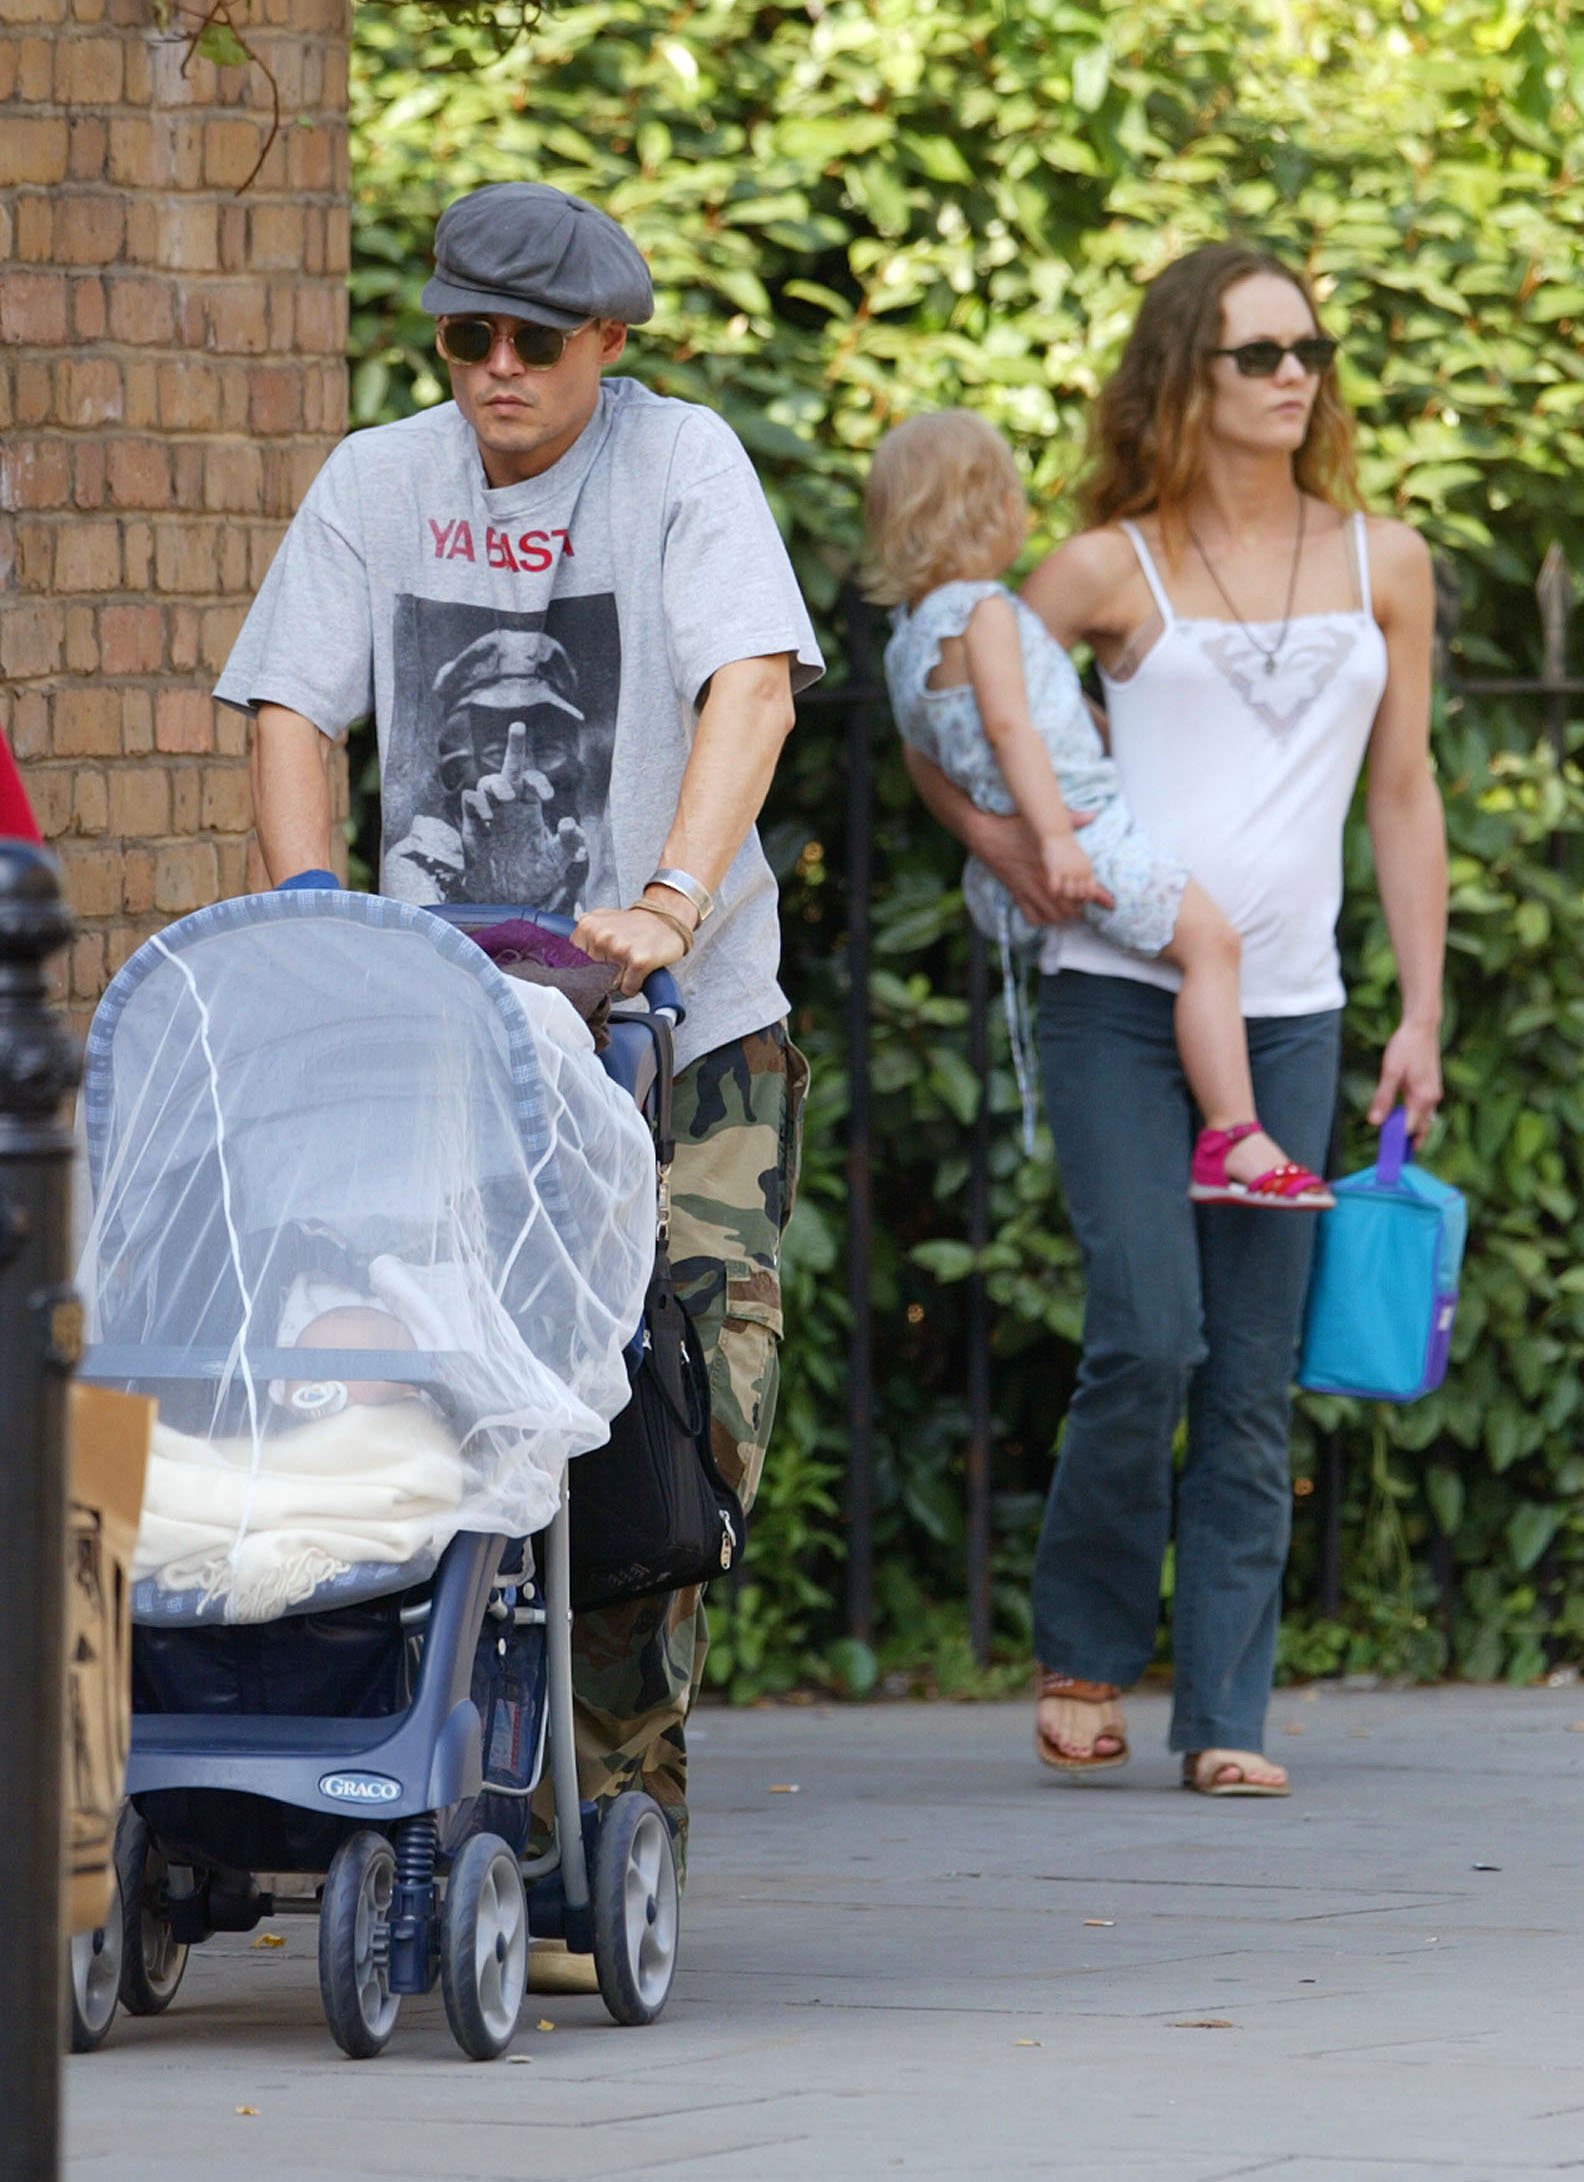 Johnny Depp & Wife Vanessa Paradis Take Their Two Children For A Picnic In A London Park. | Source: Getty Images